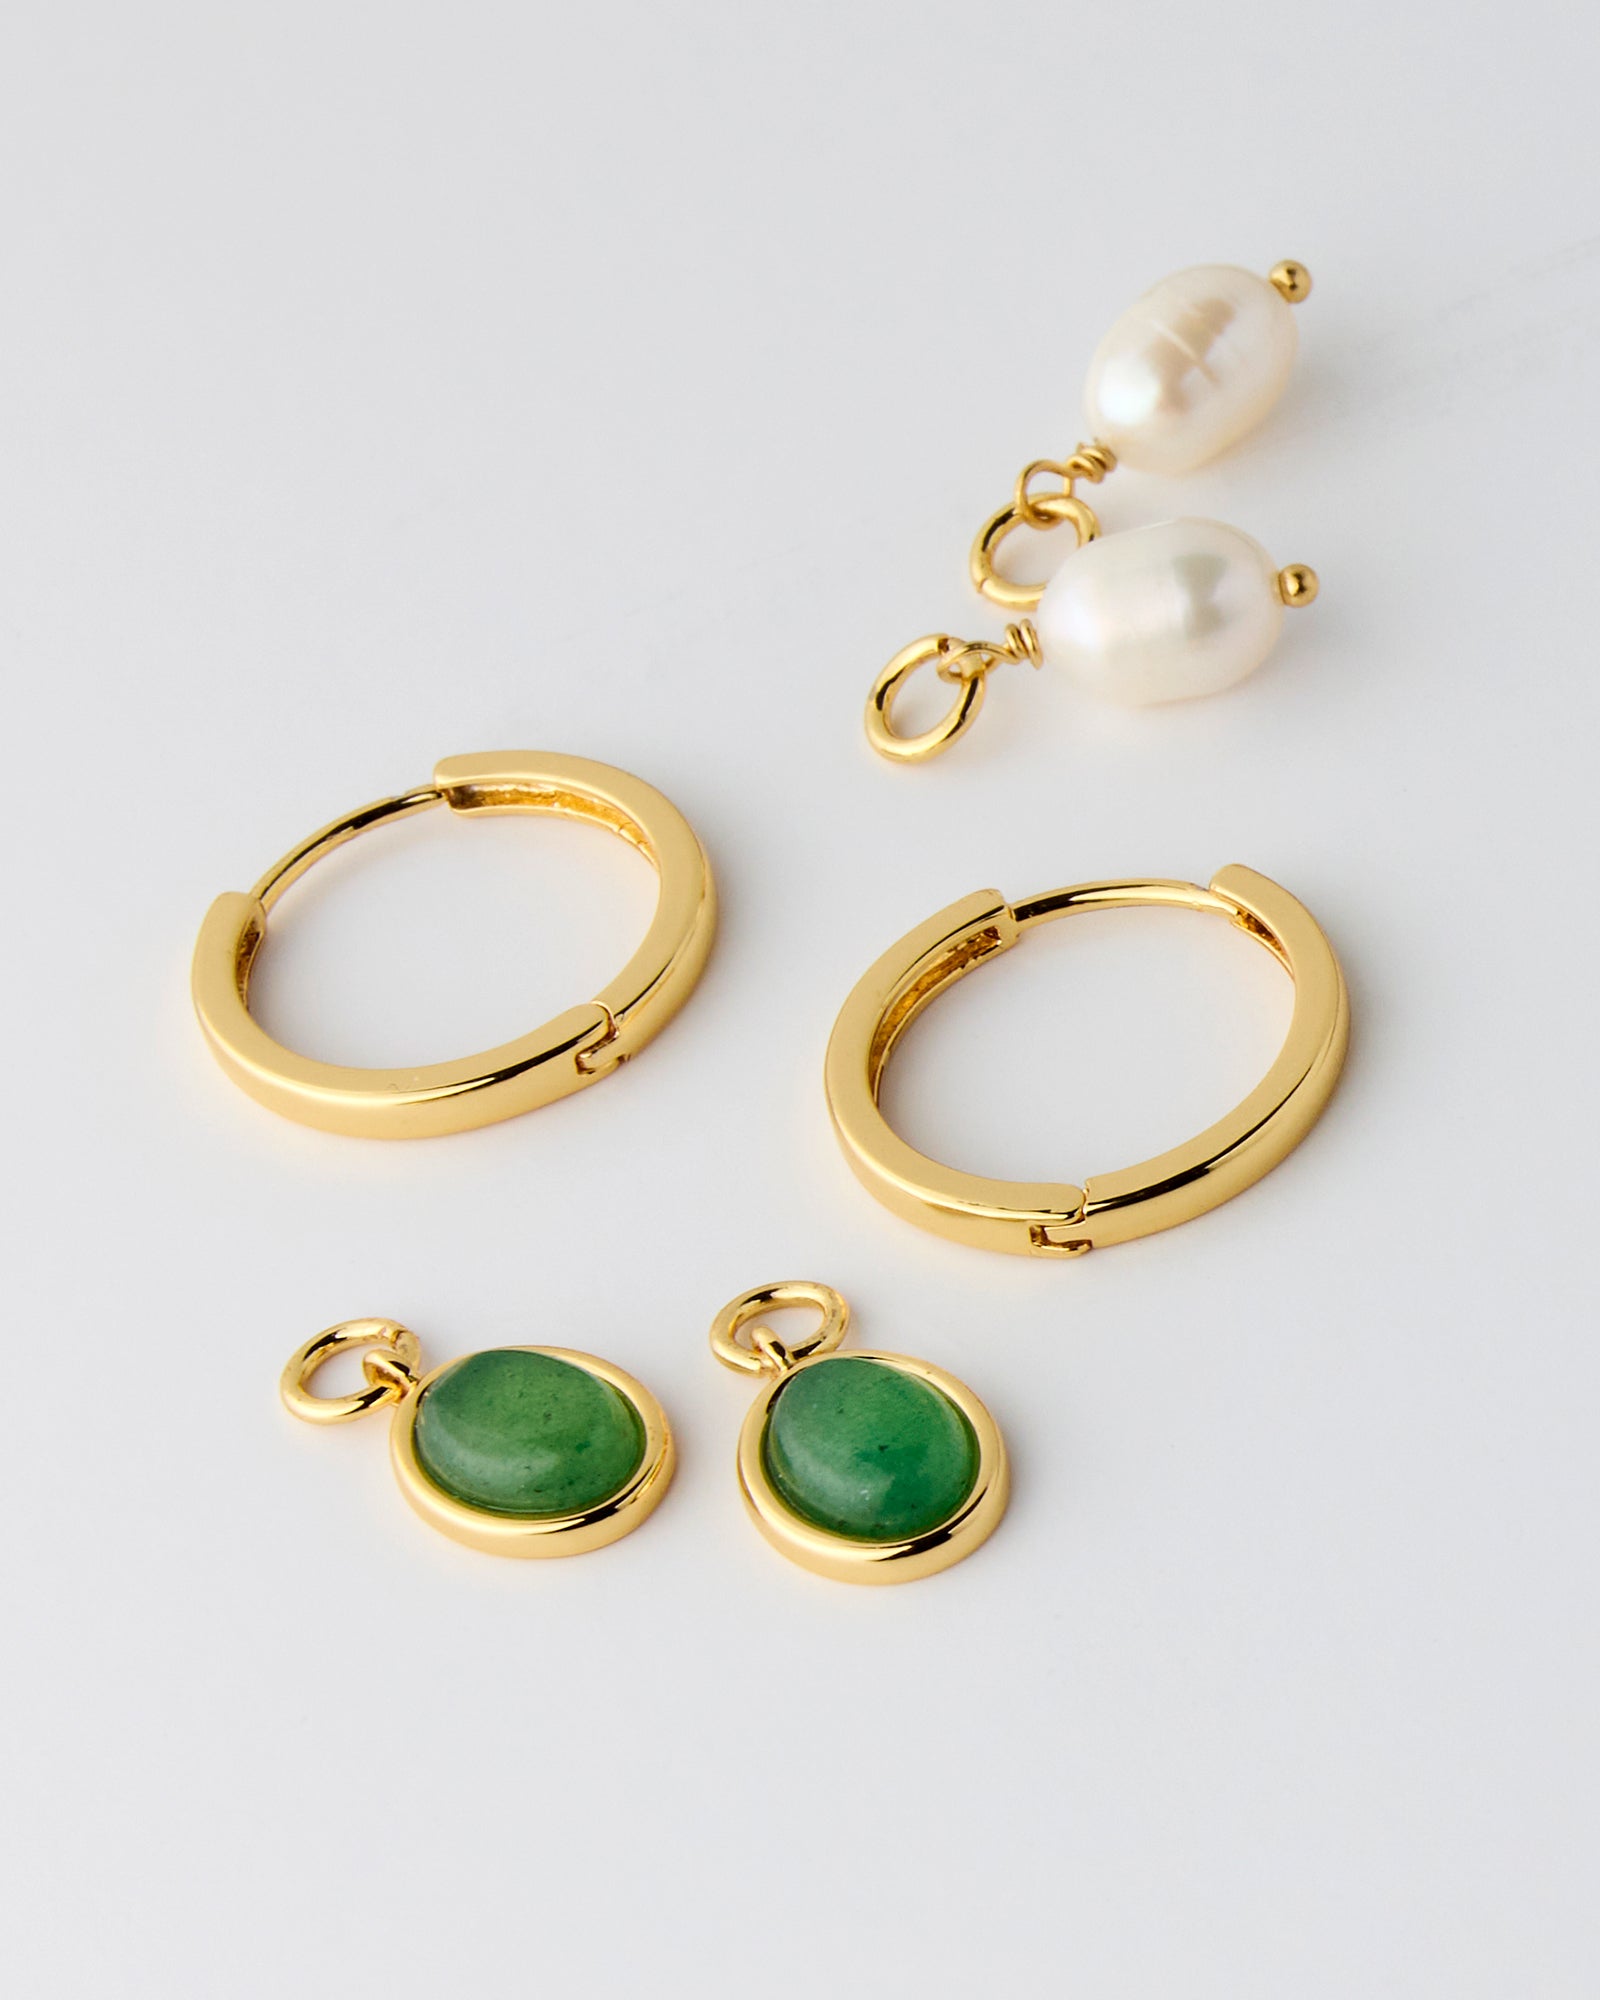 Gold hoops with interchangeable pendants of green stone or pearl